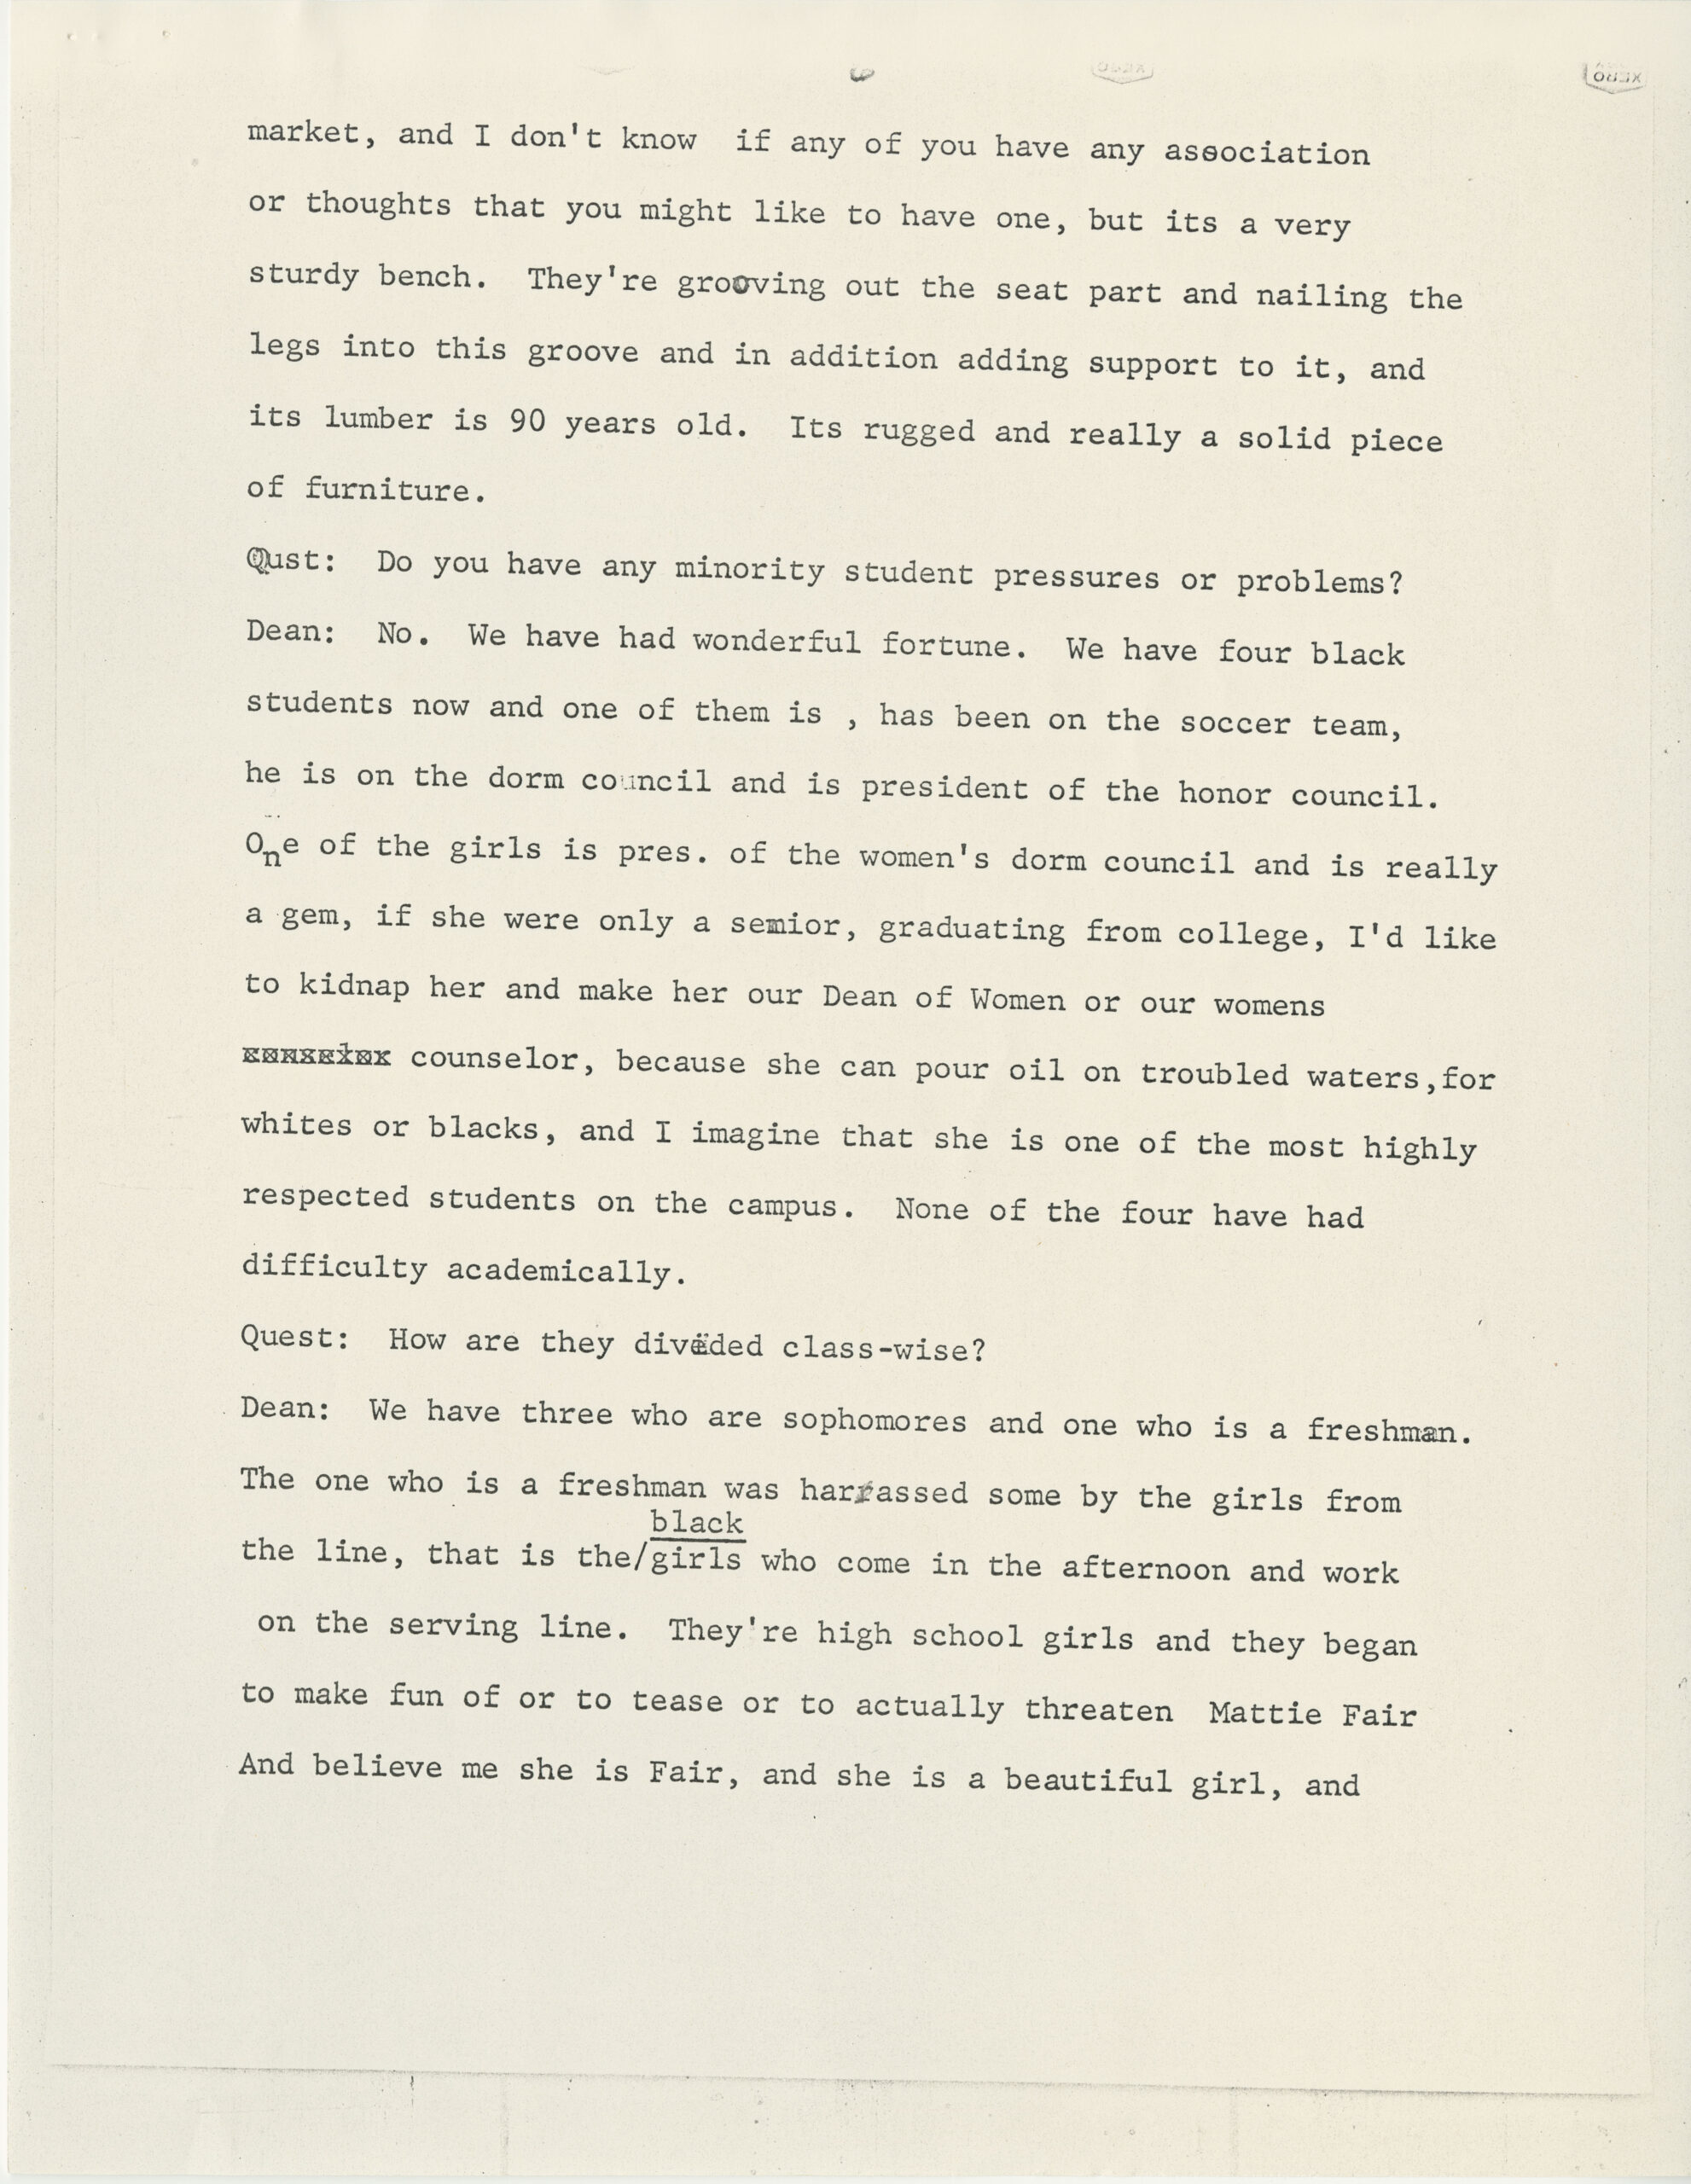 page from Dean's Q&A in 1970